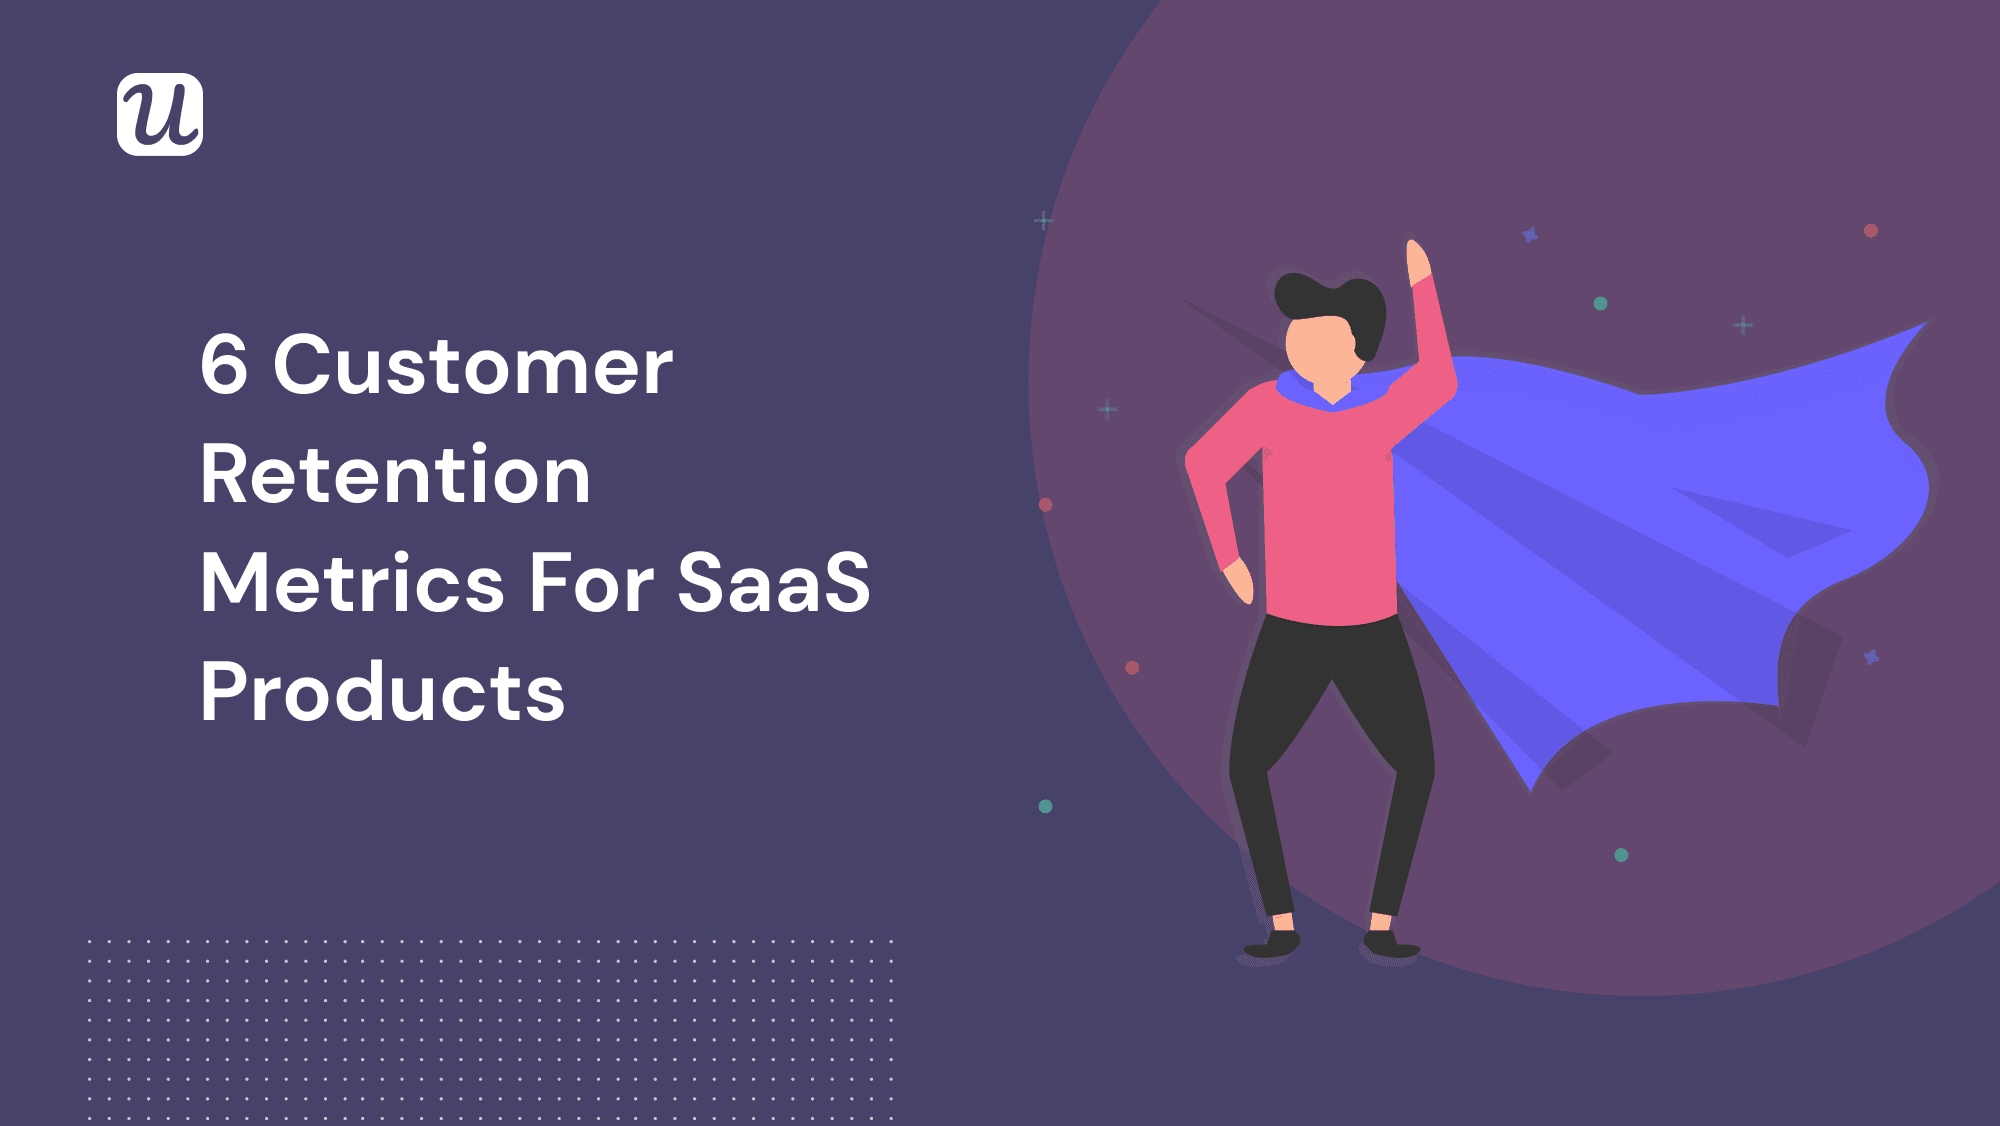 6 Customer Retention Rate and Related Retention Metrics for SaaS Products